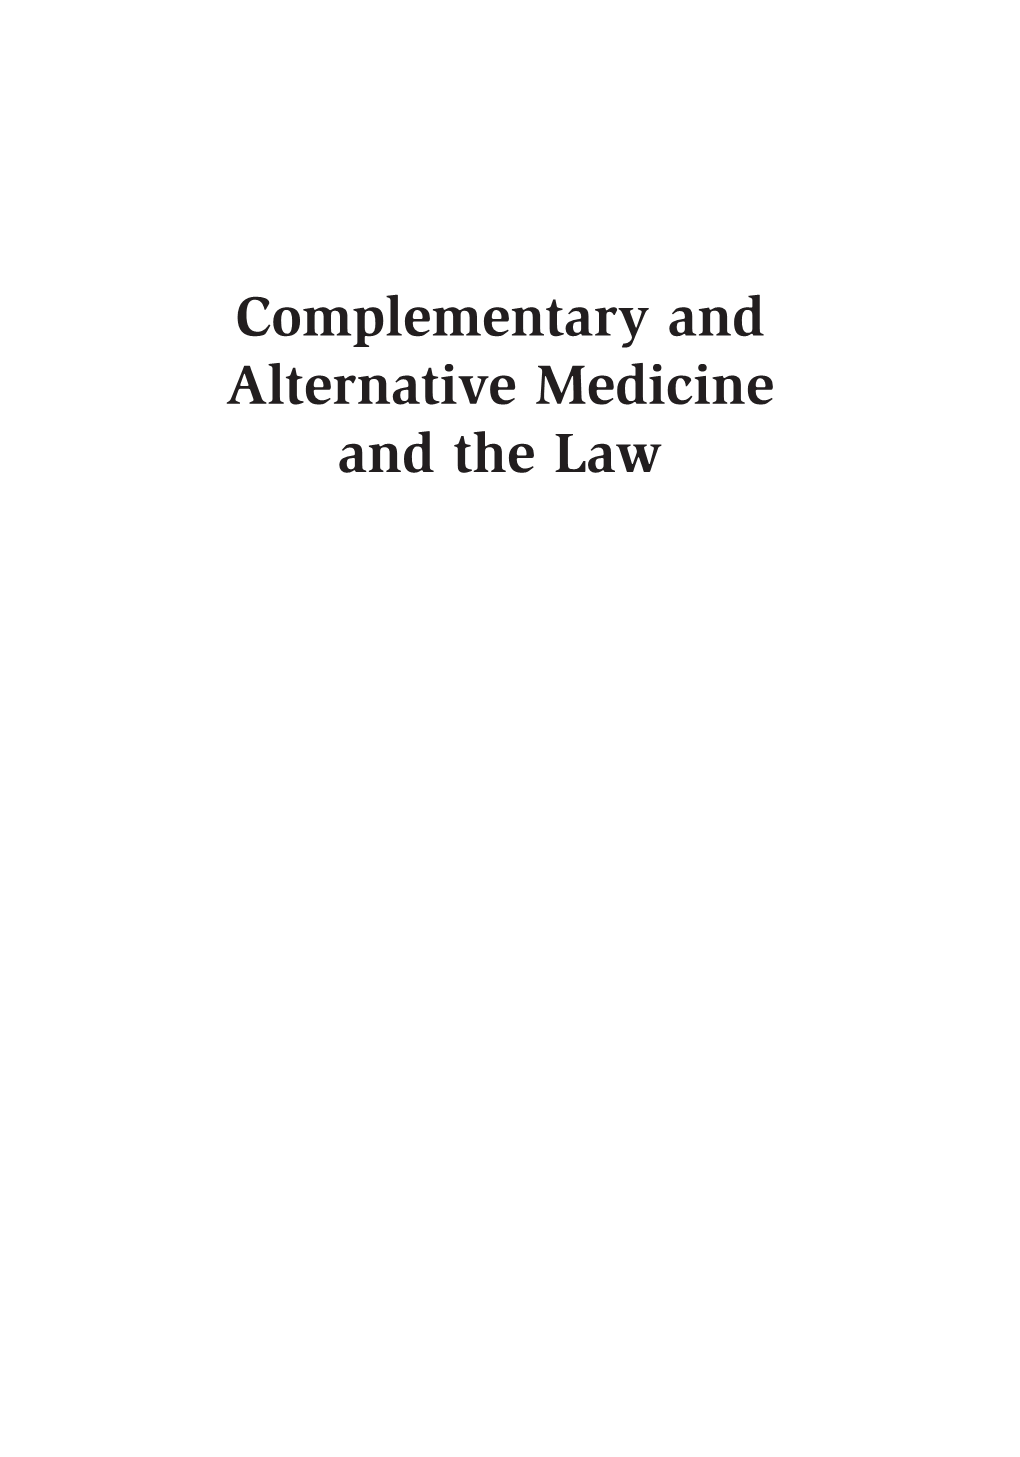 Complementary and Alternative Medicine and the Law 00 Jesson Tovino Fmt 4/21/10 8:30 AM Page Ii 00 Jesson Tovino Fmt 4/21/10 8:30 AM Page Iii